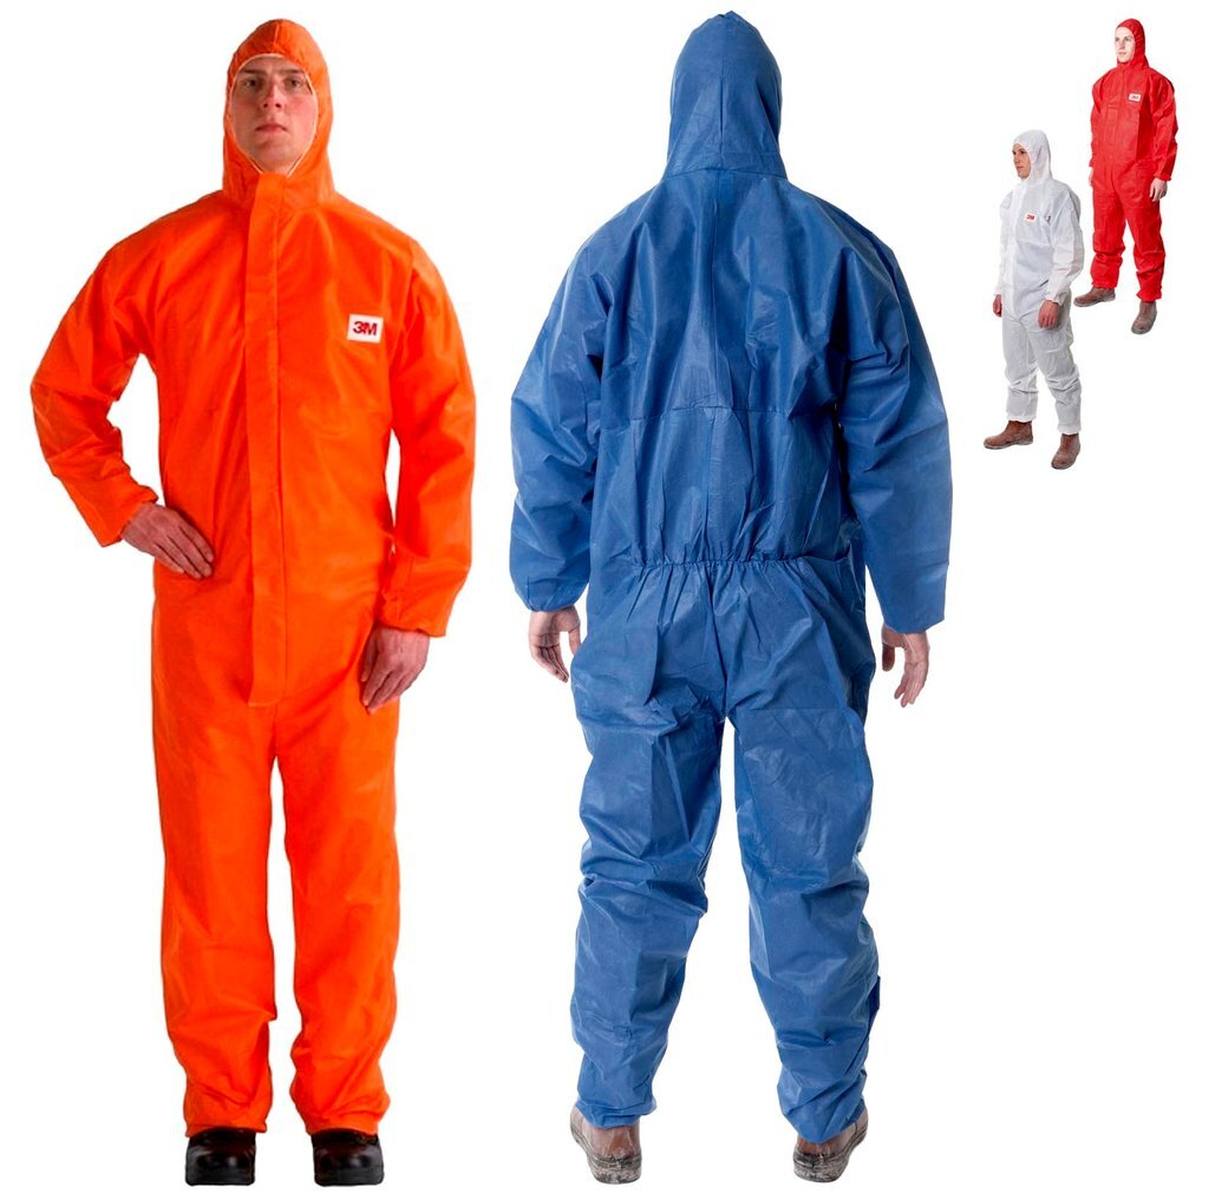 3M 4515O Protective suit, orange, TYPE 5/6, size M, material SMMS low-lint, elasticated cuffs